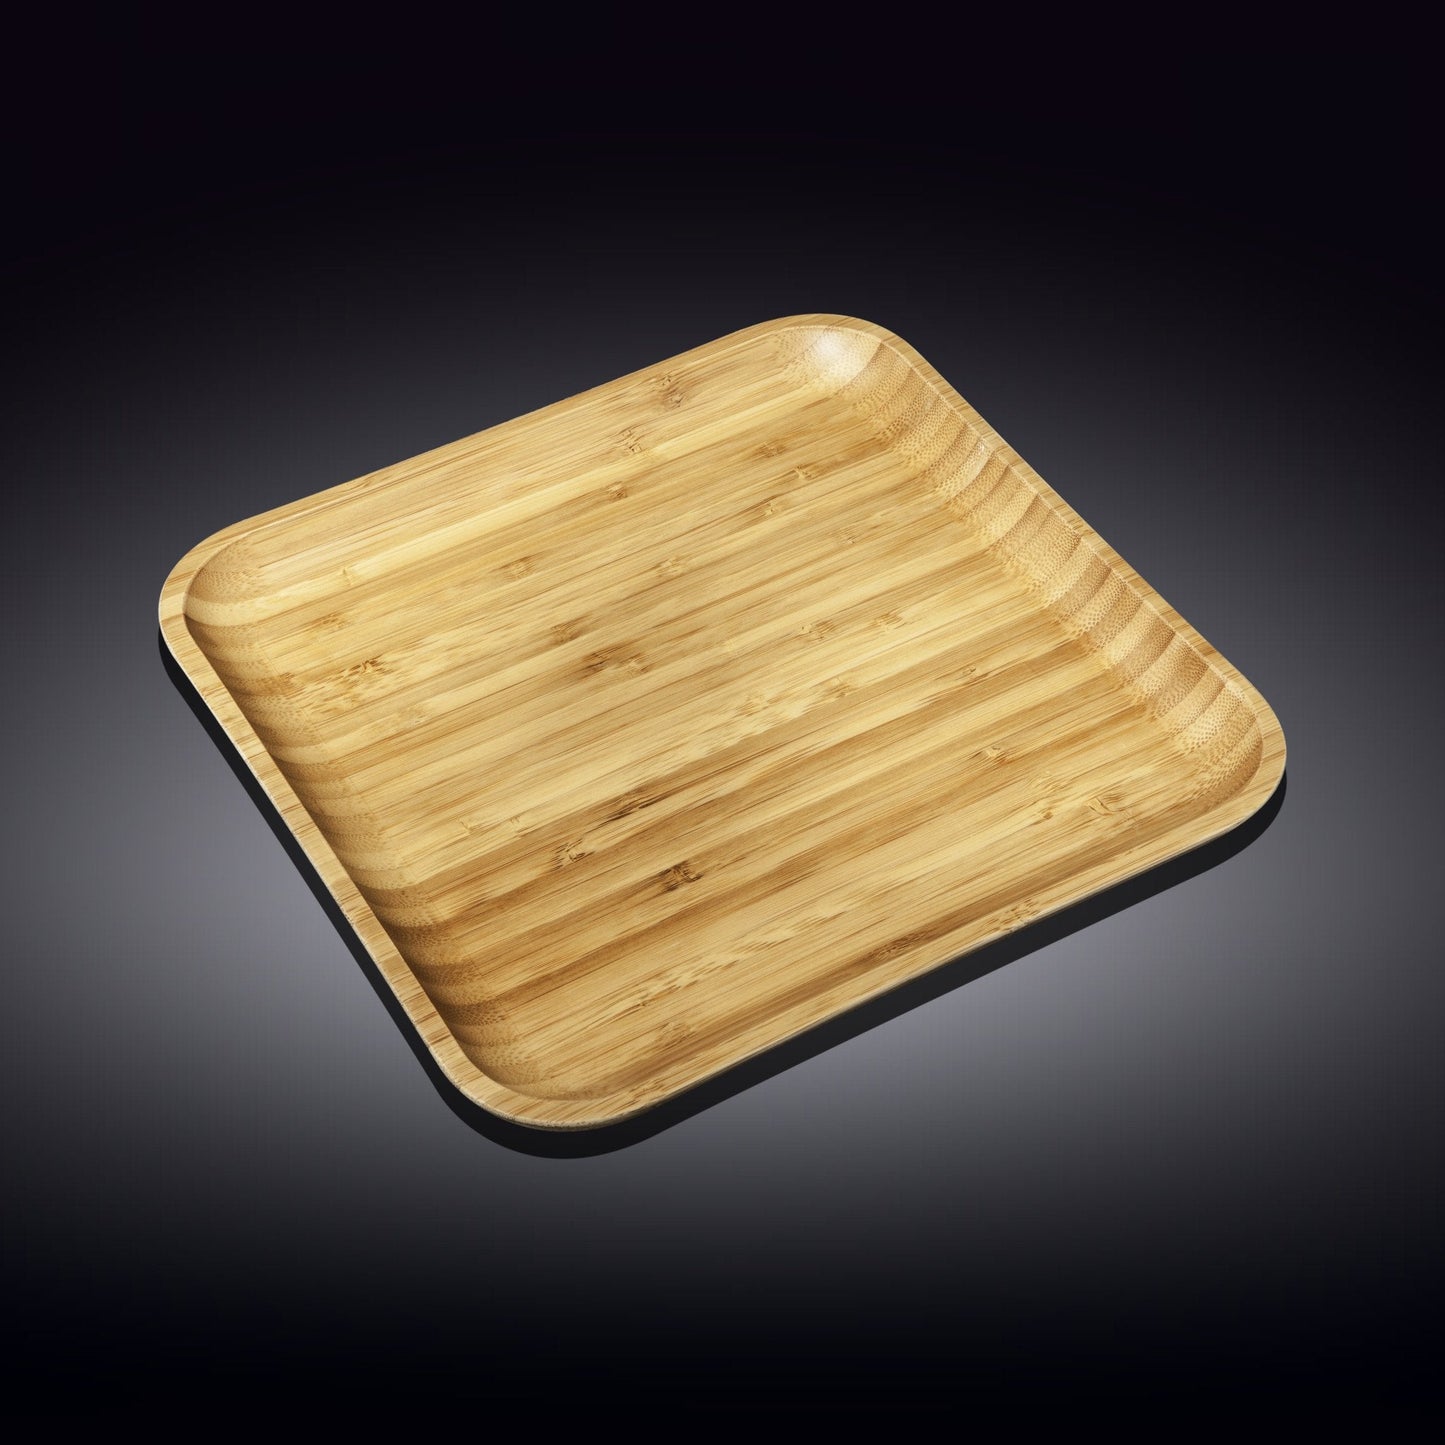 Bamboo Square Platter 13" inch X 13" inch -1